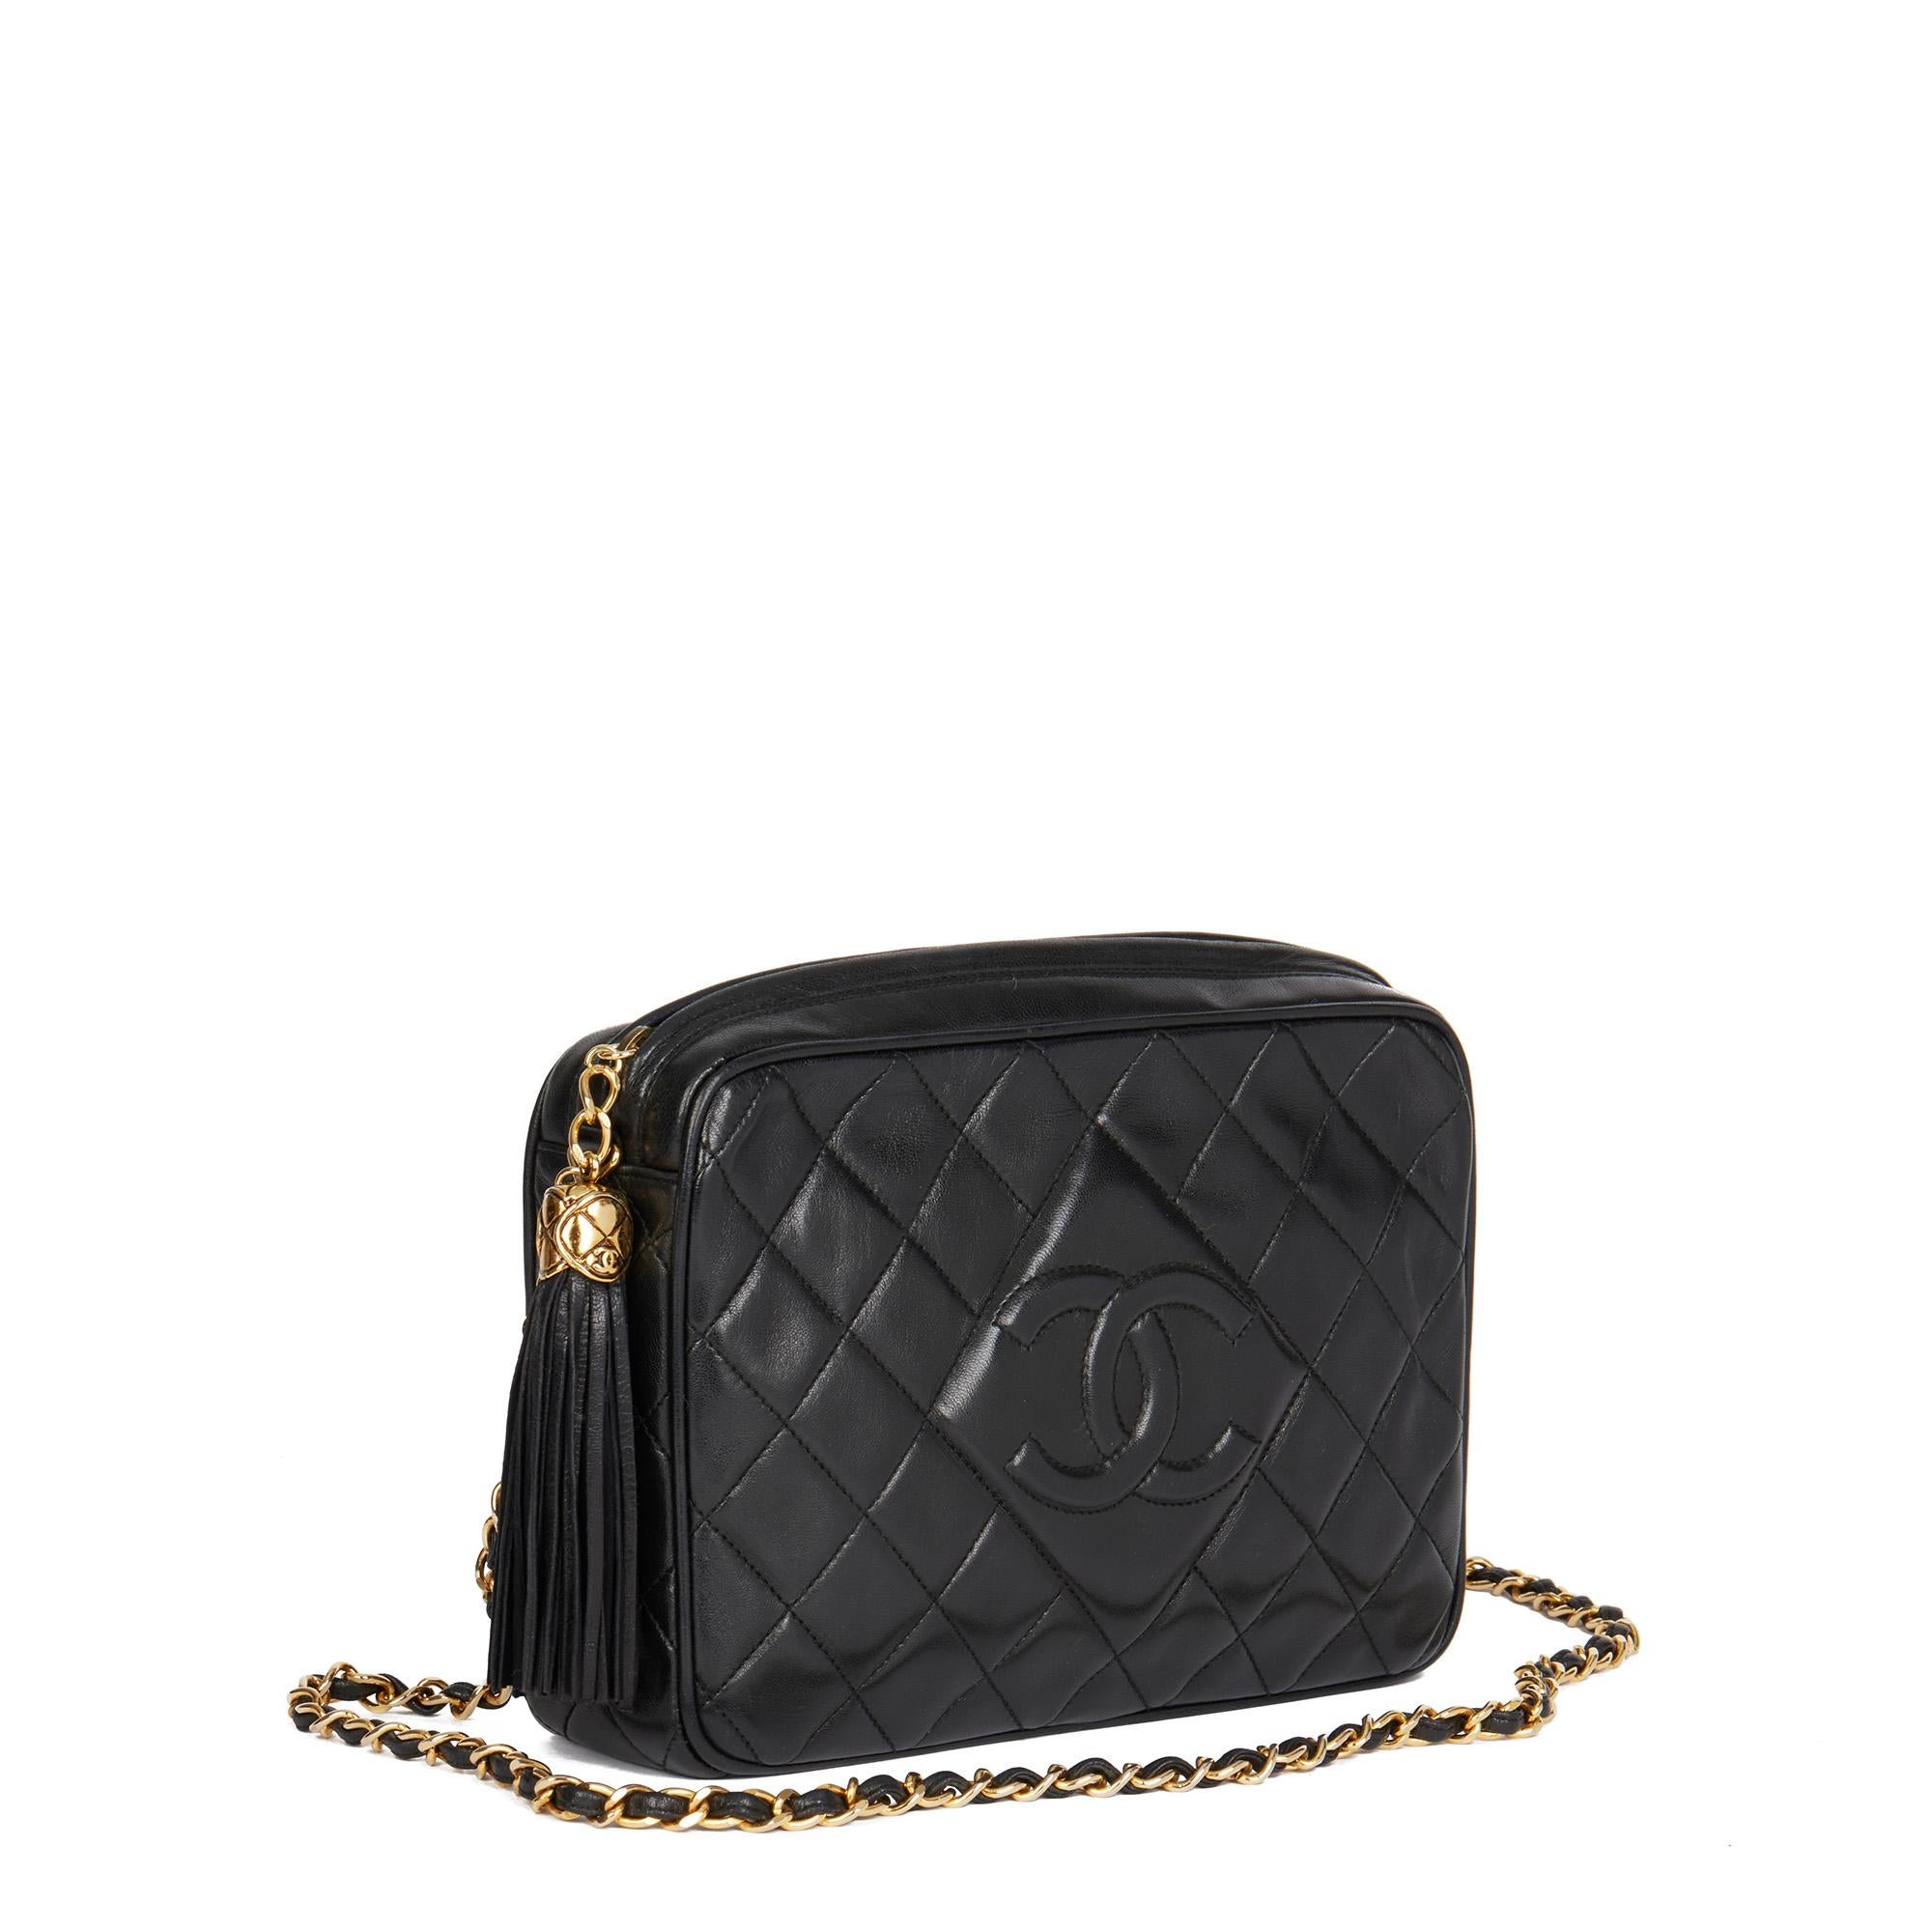 CHANEL
Black Quilted Lambskin Vintage Small Fringe Timeless Shoulder Bag

Xupes Reference: HB4680
Serial Number: 1554284
Age (Circa): 1990
Accompanied By: Chanel Dust Bag, Authenticity Card
Authenticity Details: Authenticity Card, Serial Sticker